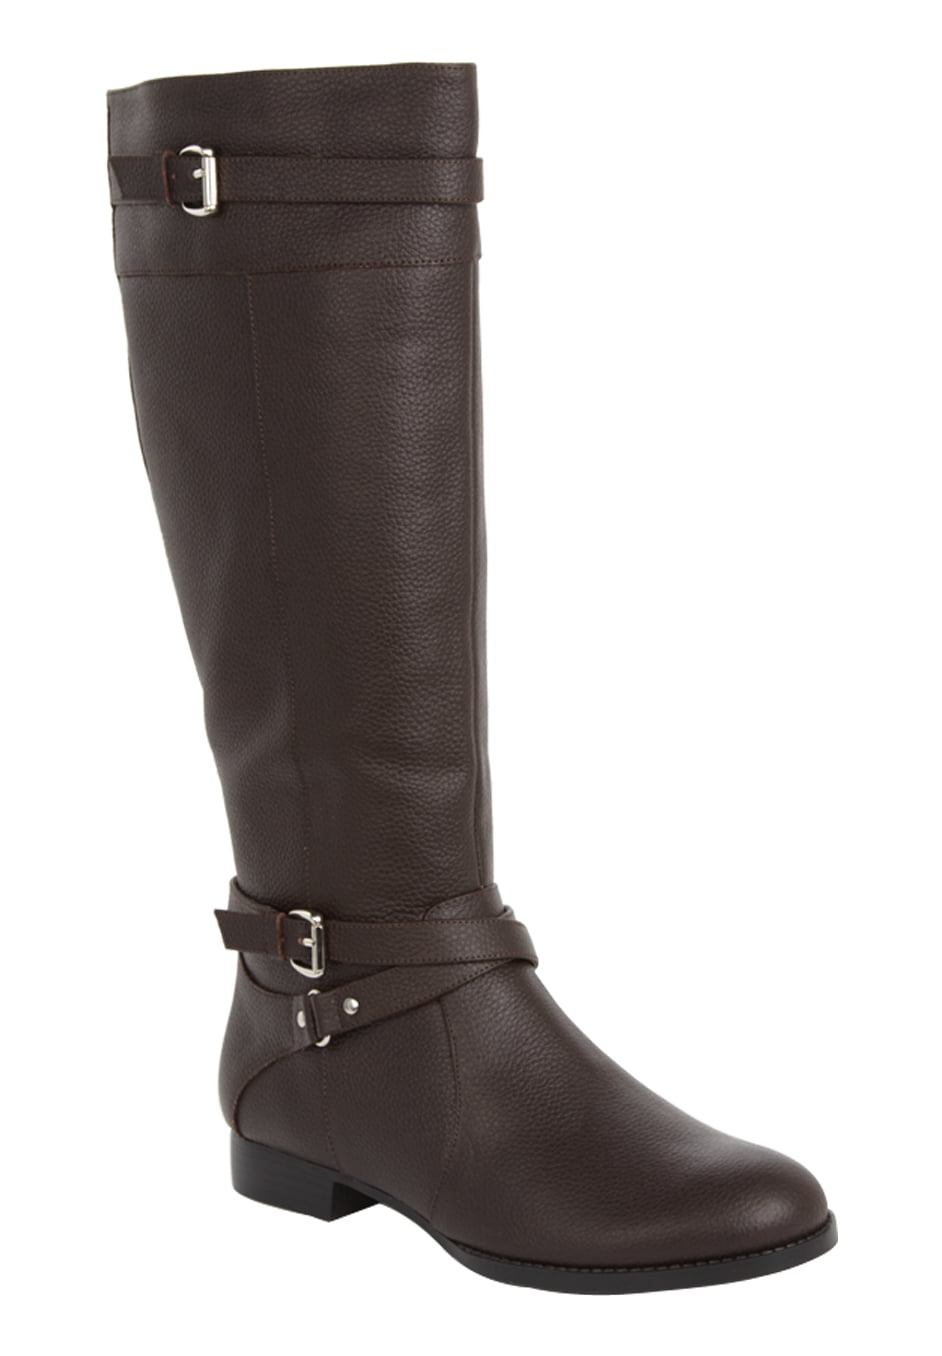 wide calf leather boot